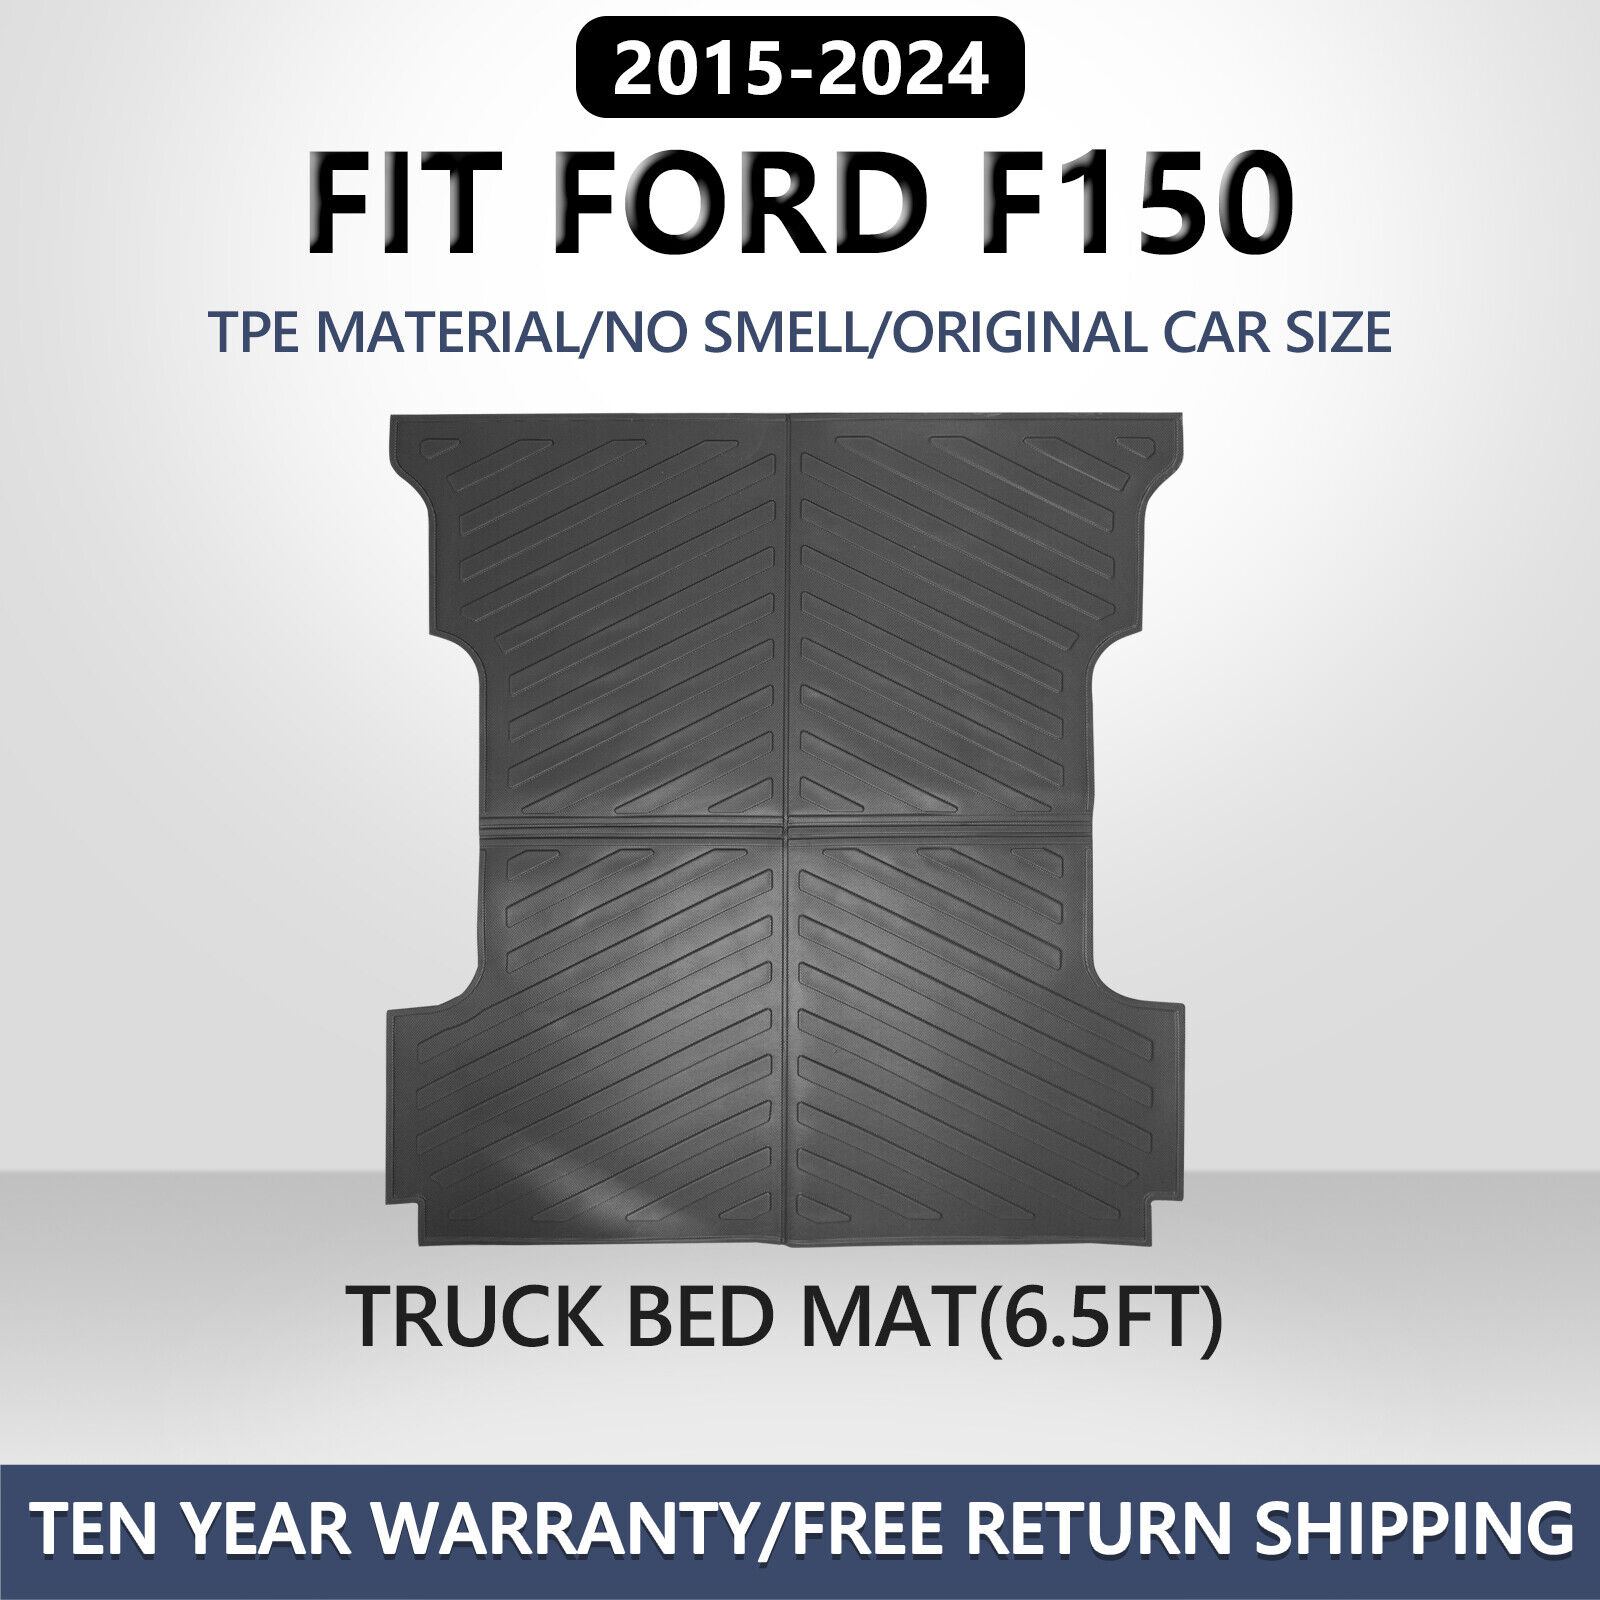 Truck Bed Liner TPE Truck Bed Mats Cargo Liner For 2015-2024 Ford F150